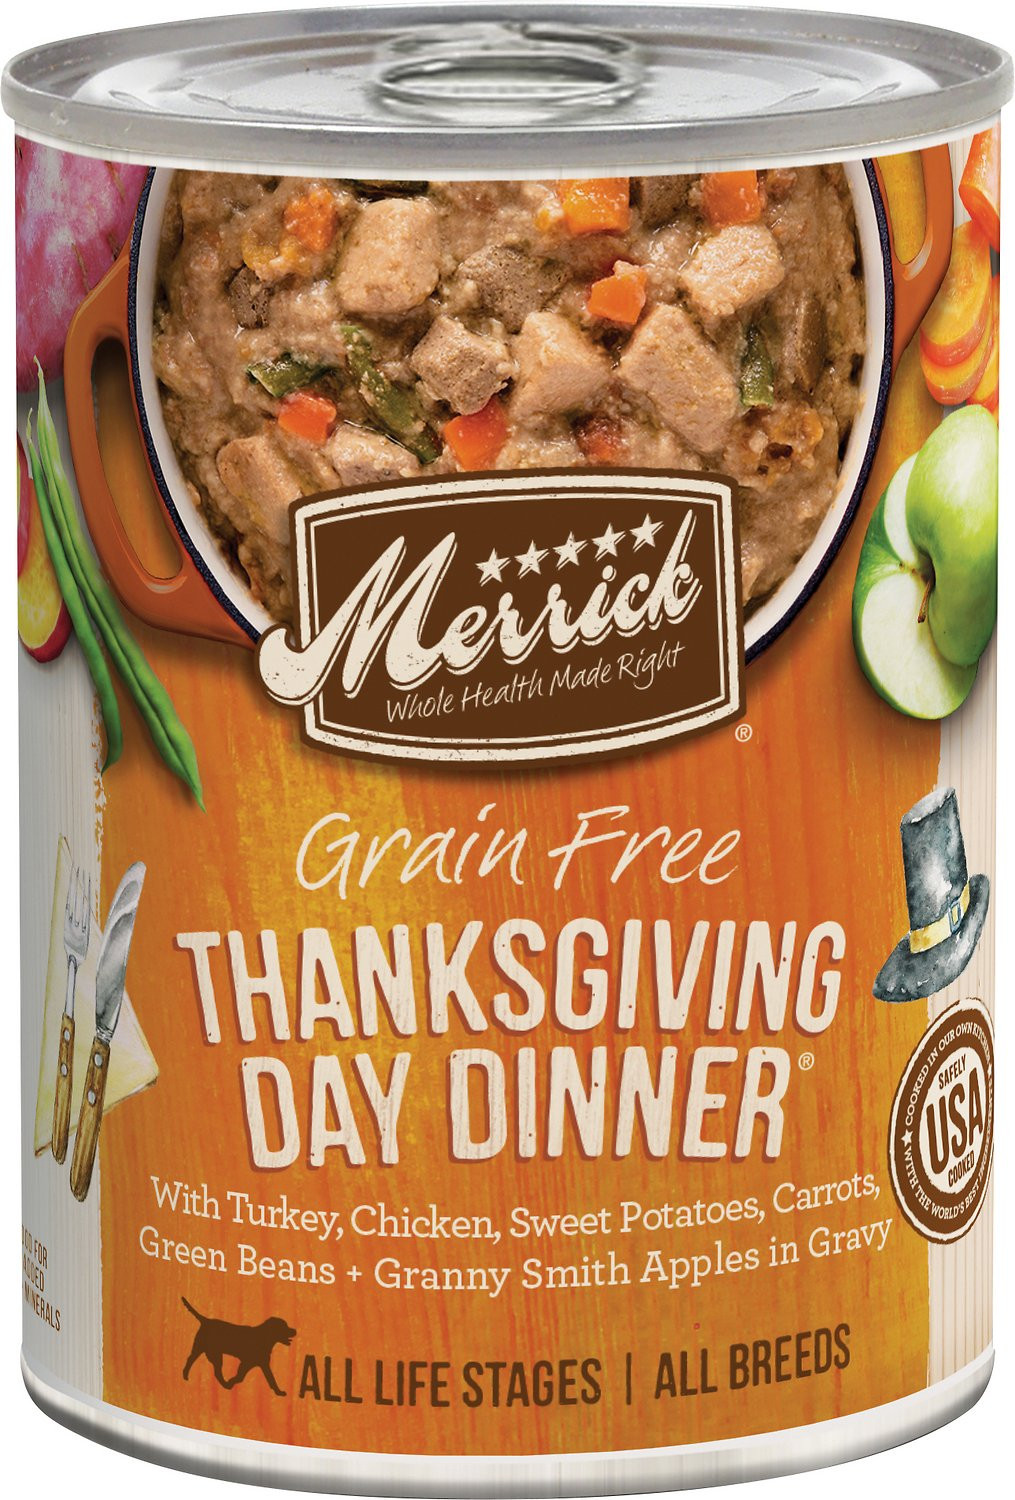 Craigs Thanksgiving Dinner In A Can
 Merrick Grain Free Thanksgiving Day Dinner Canned Dog Food